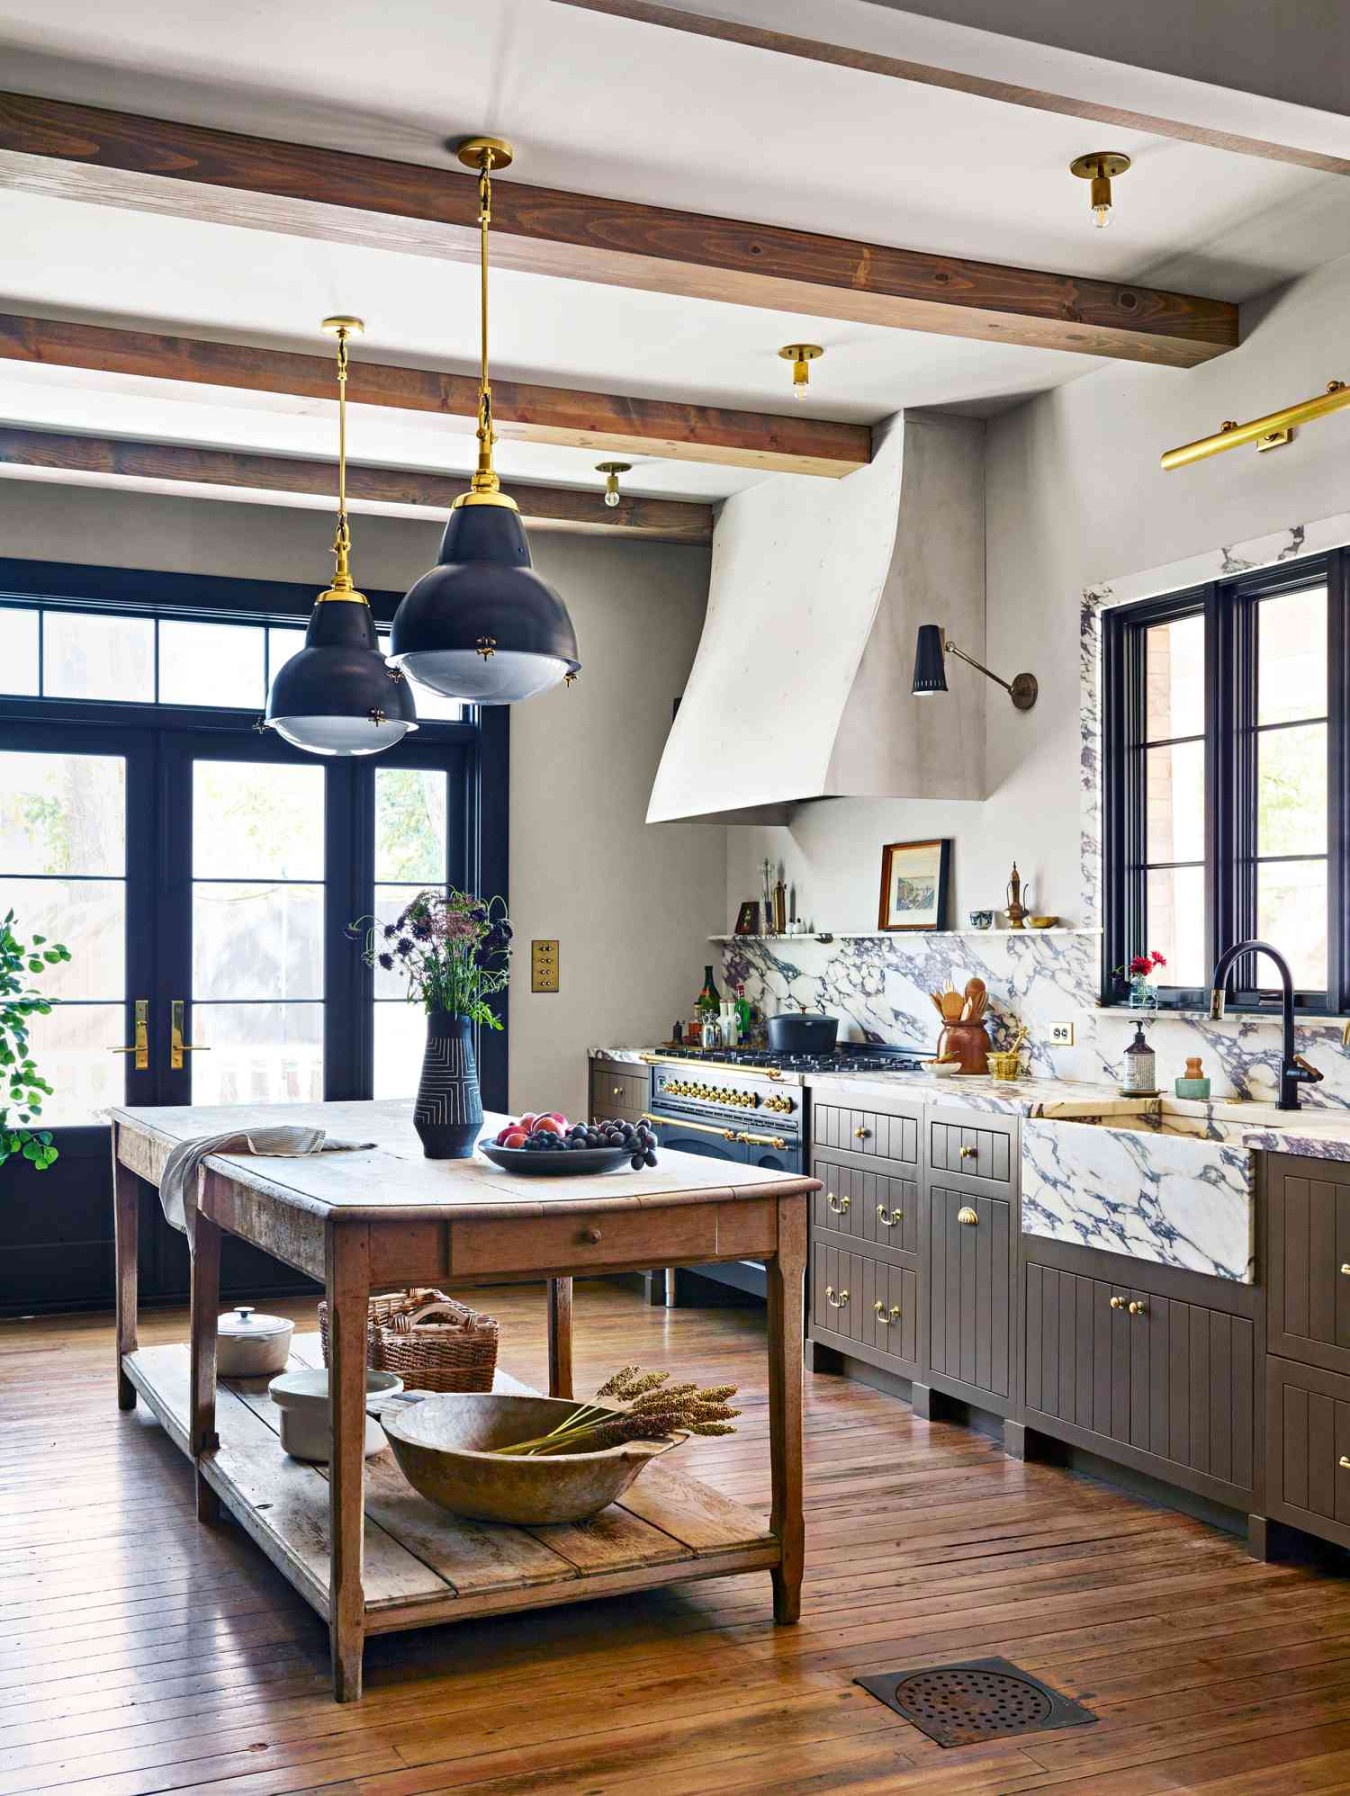 Kitchen Ideas To Help You Plan Your Dream Space